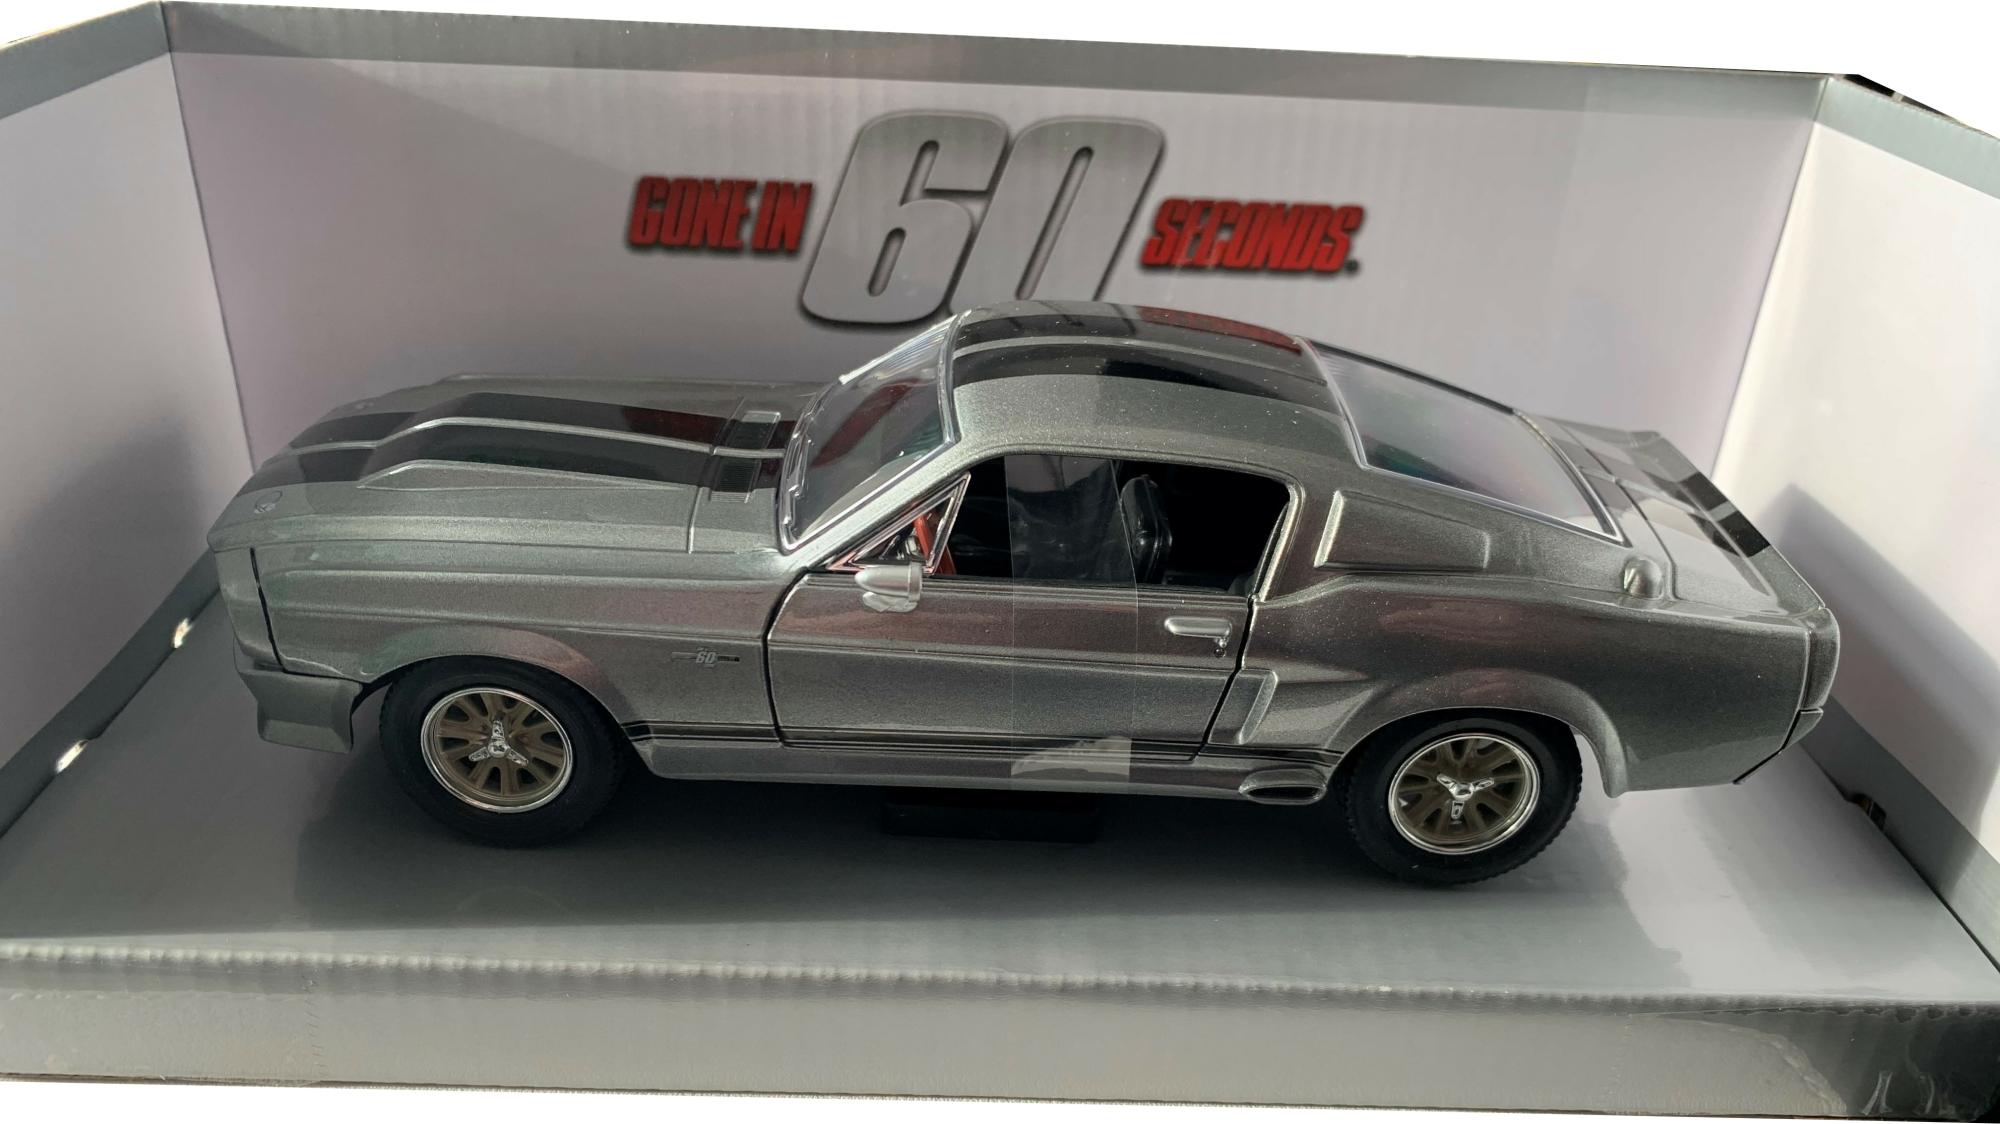 Ford Shelby/Mustang Eleanor 1967 from Gone in 60 Seconds 1:43 scale model from Greenlight Hollywood